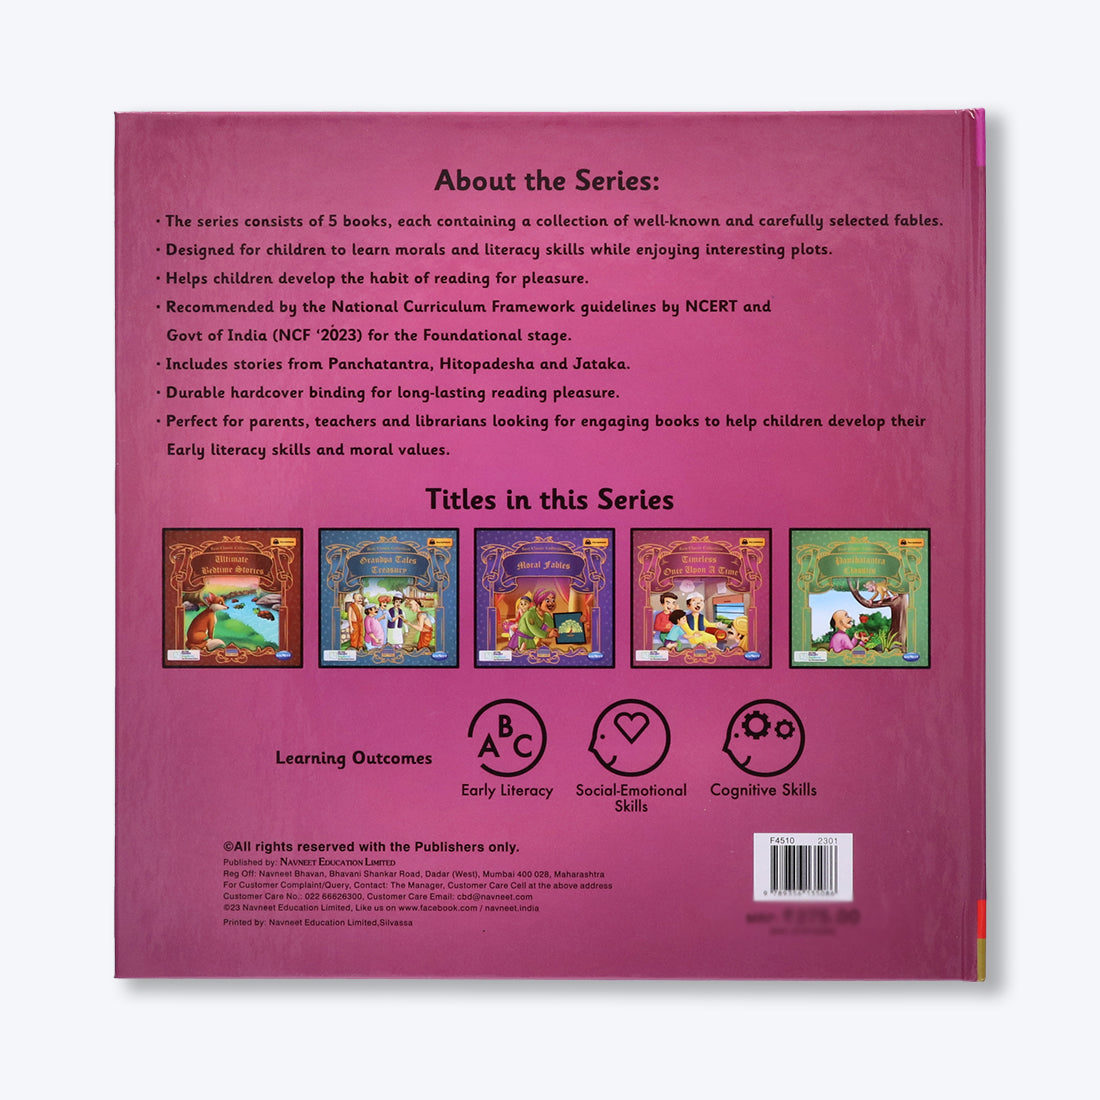 Navneet Best Classic Collection- Timeless Once Upon A Time Vocabulary Words- With Colourful Illustrations- Read aloud stories- Bedtime Stories- Audio Book- Social-Emotional